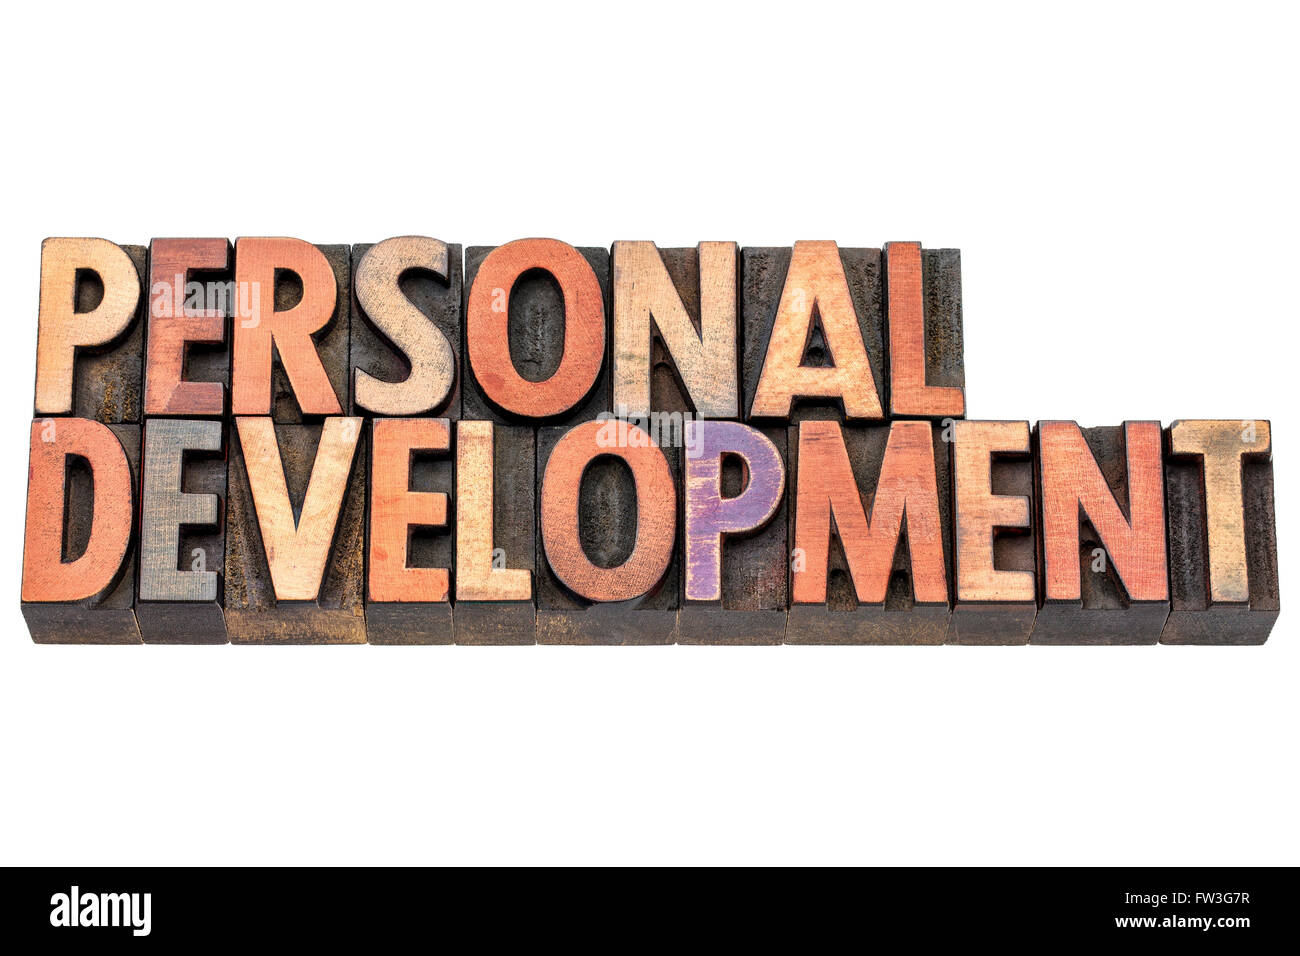 personal development  - isolated words in vintage letterpress  wood type printing blocks Stock Photo